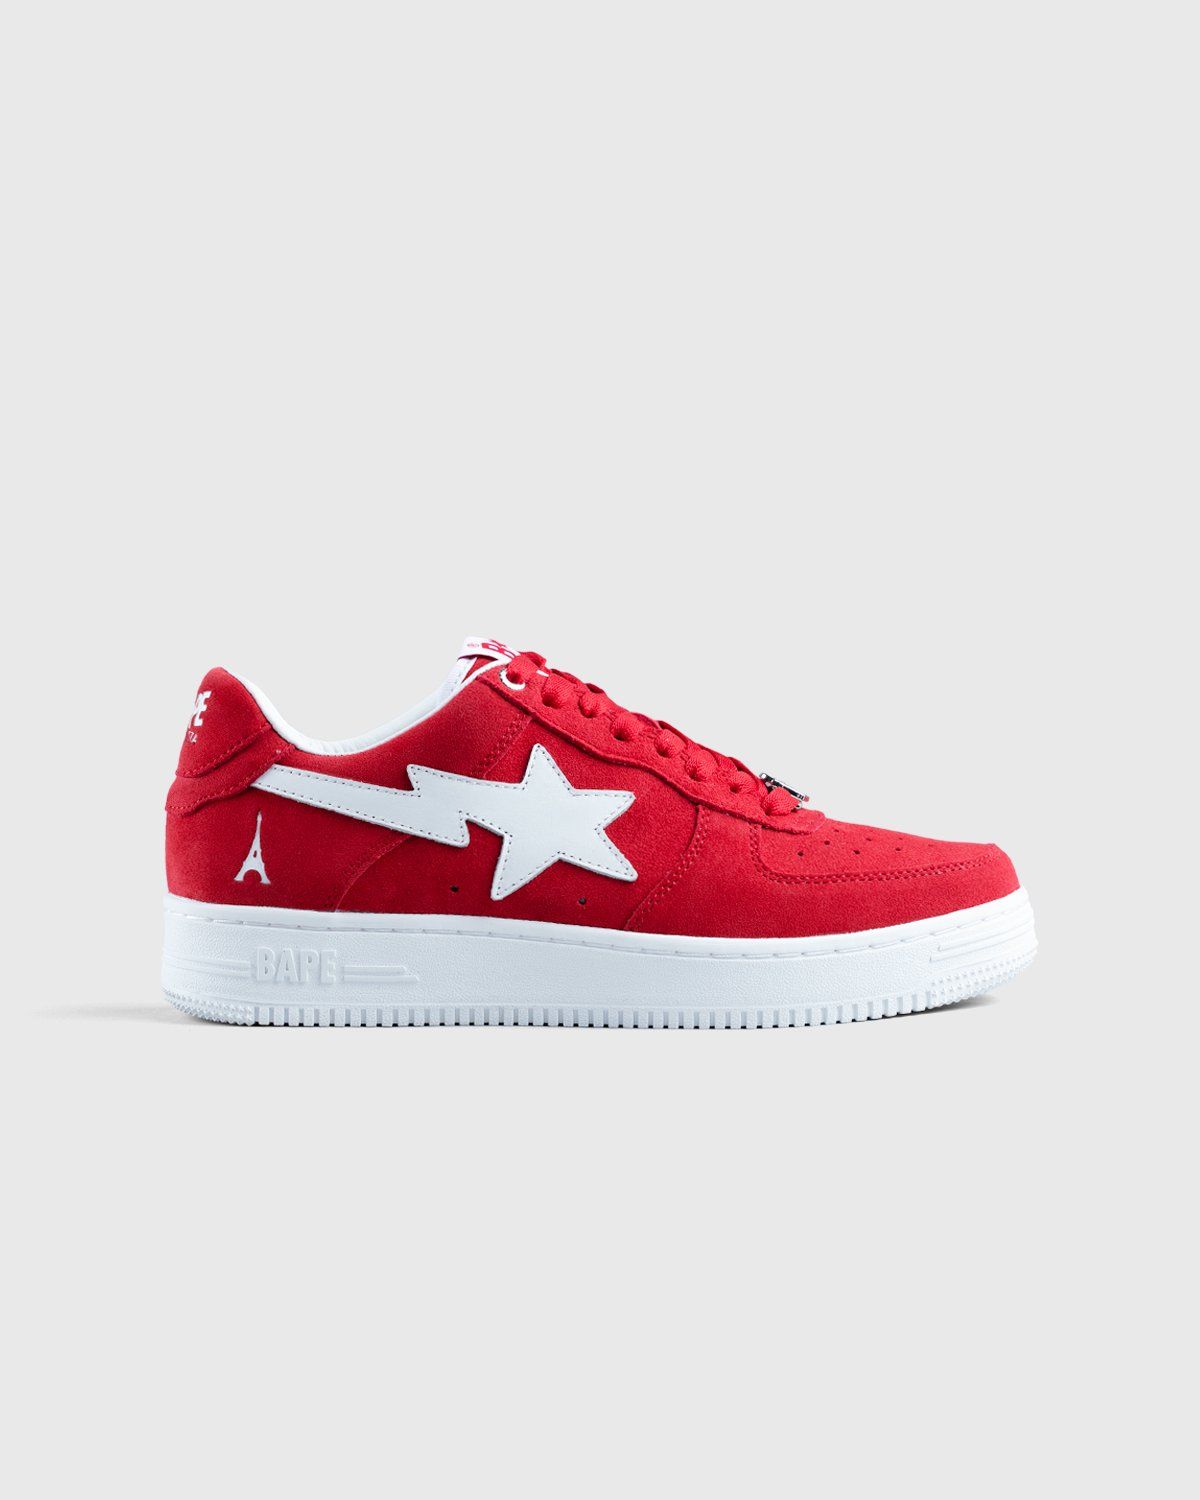 BAPE x Highsnobiety – BAPE STA Red - Sneakers - Red - Image 1